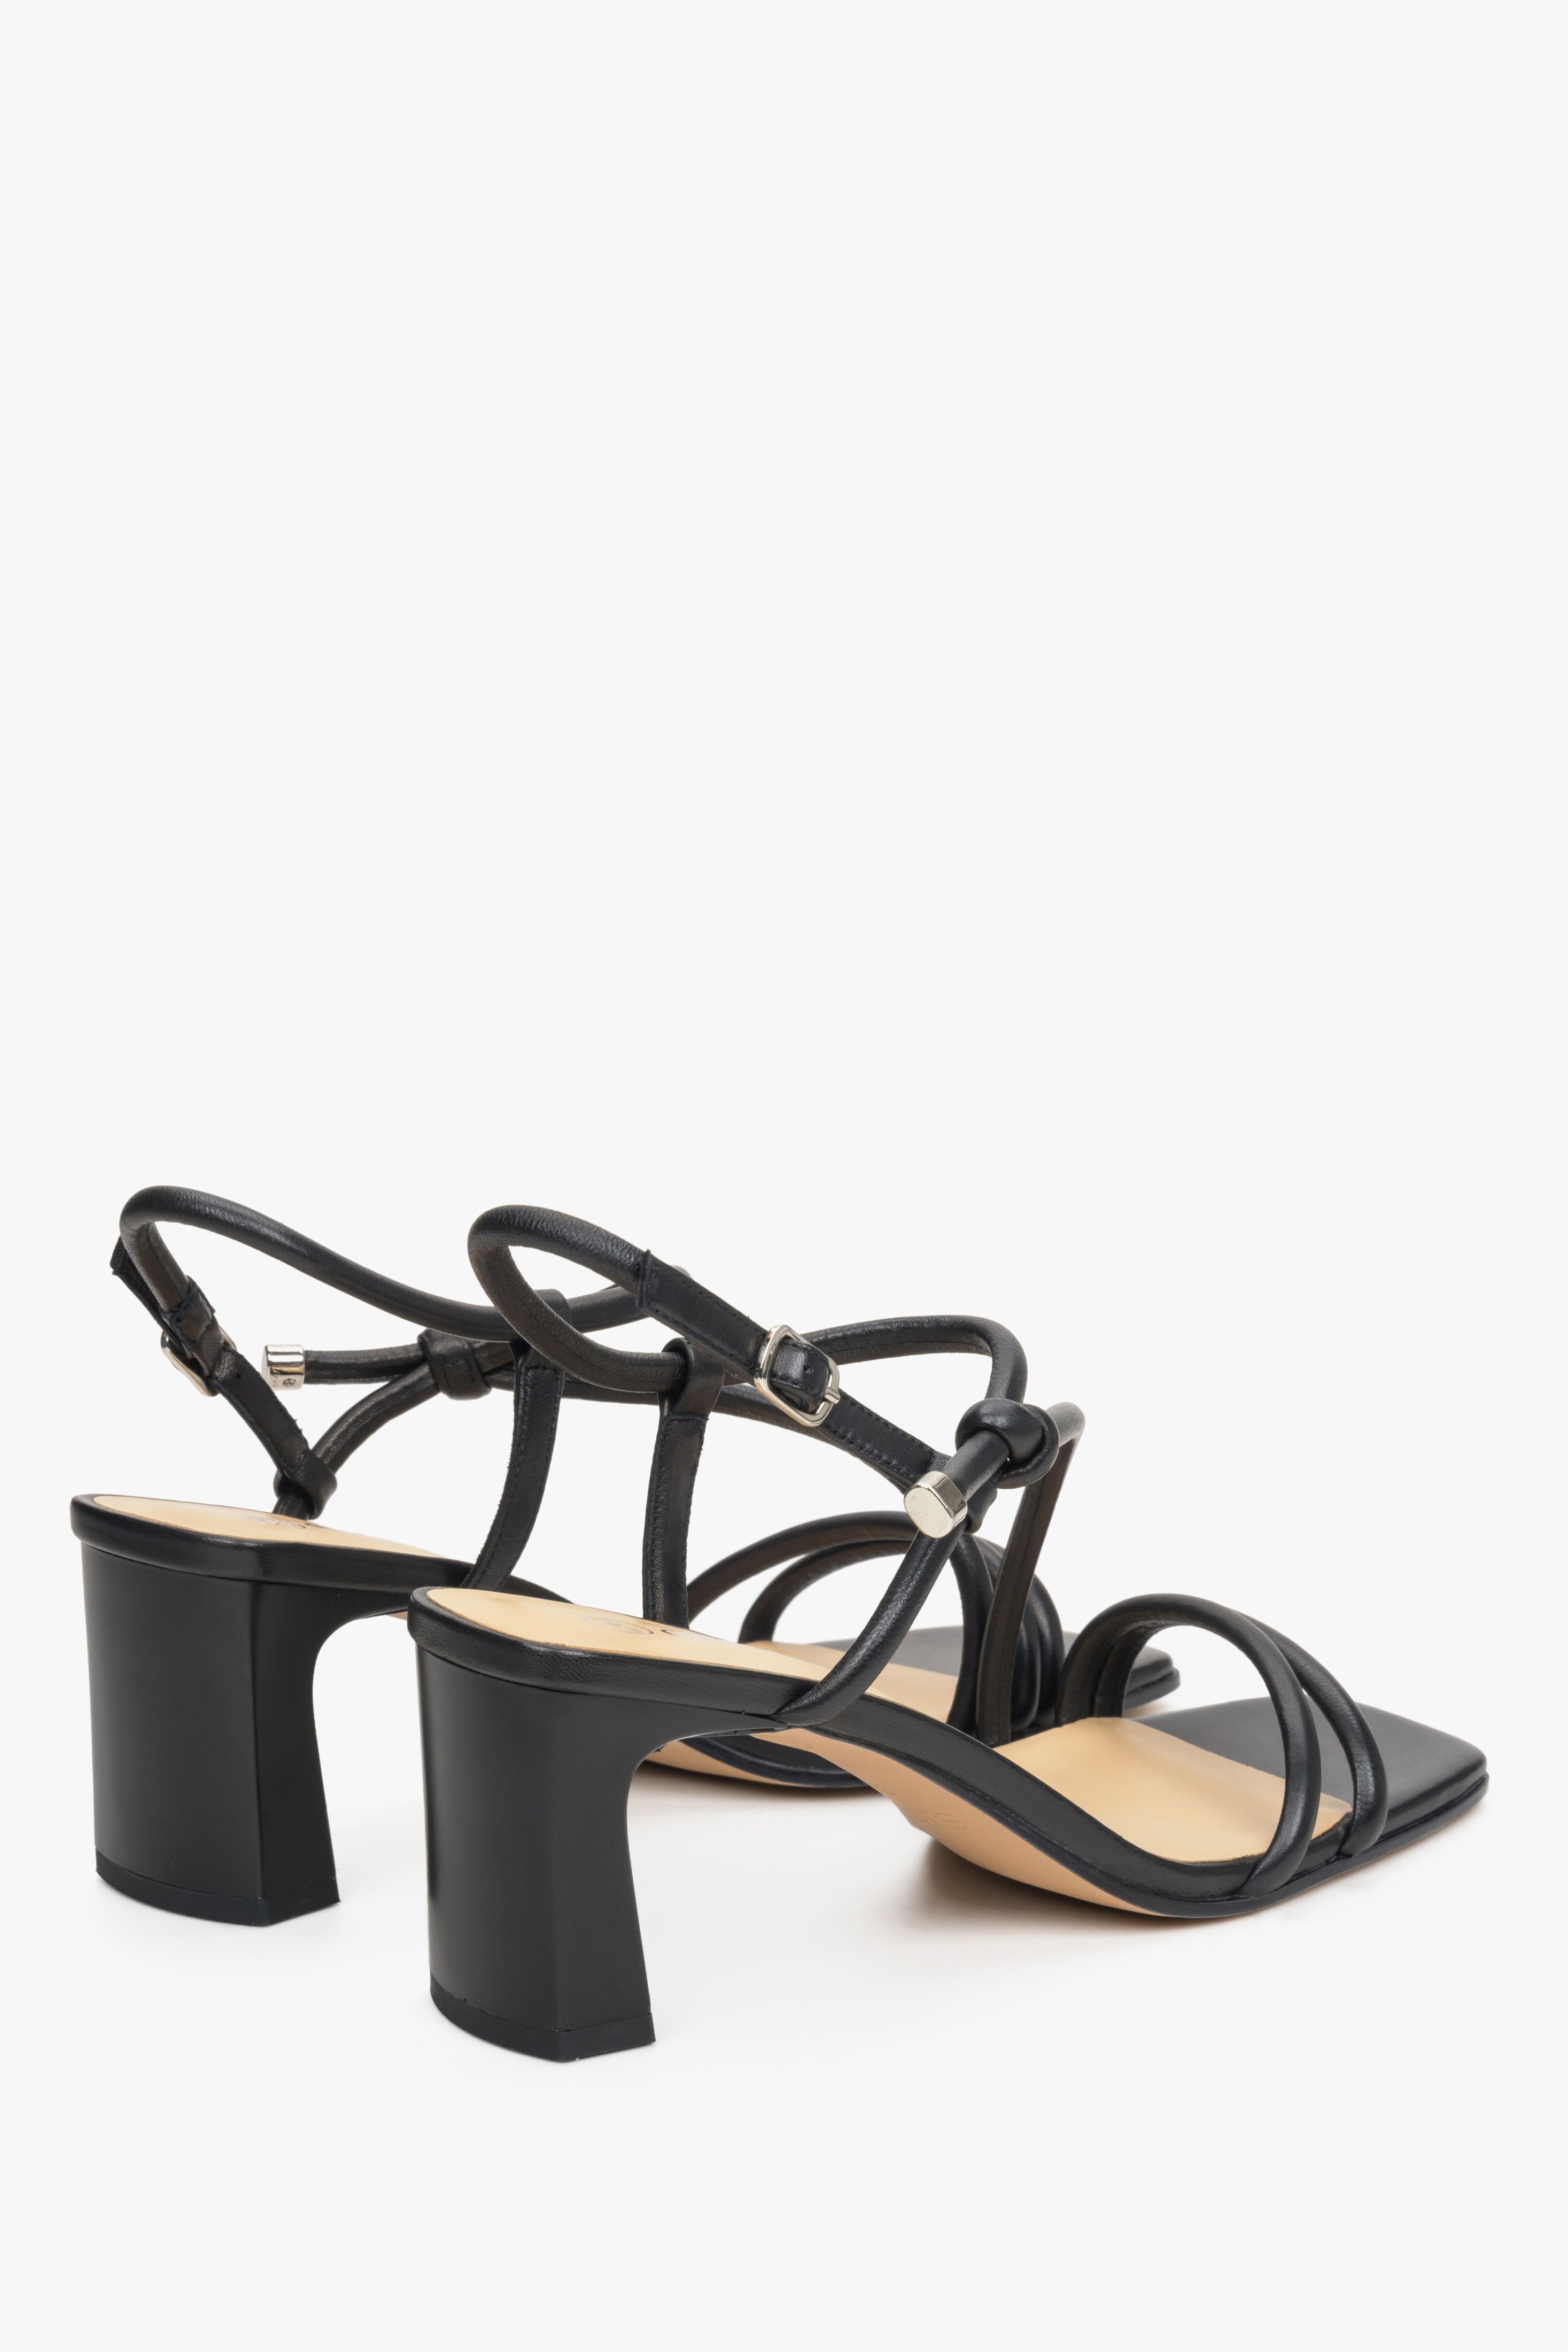 Black leather strappy sandals on a block heel, presentation of the heel and sideline.